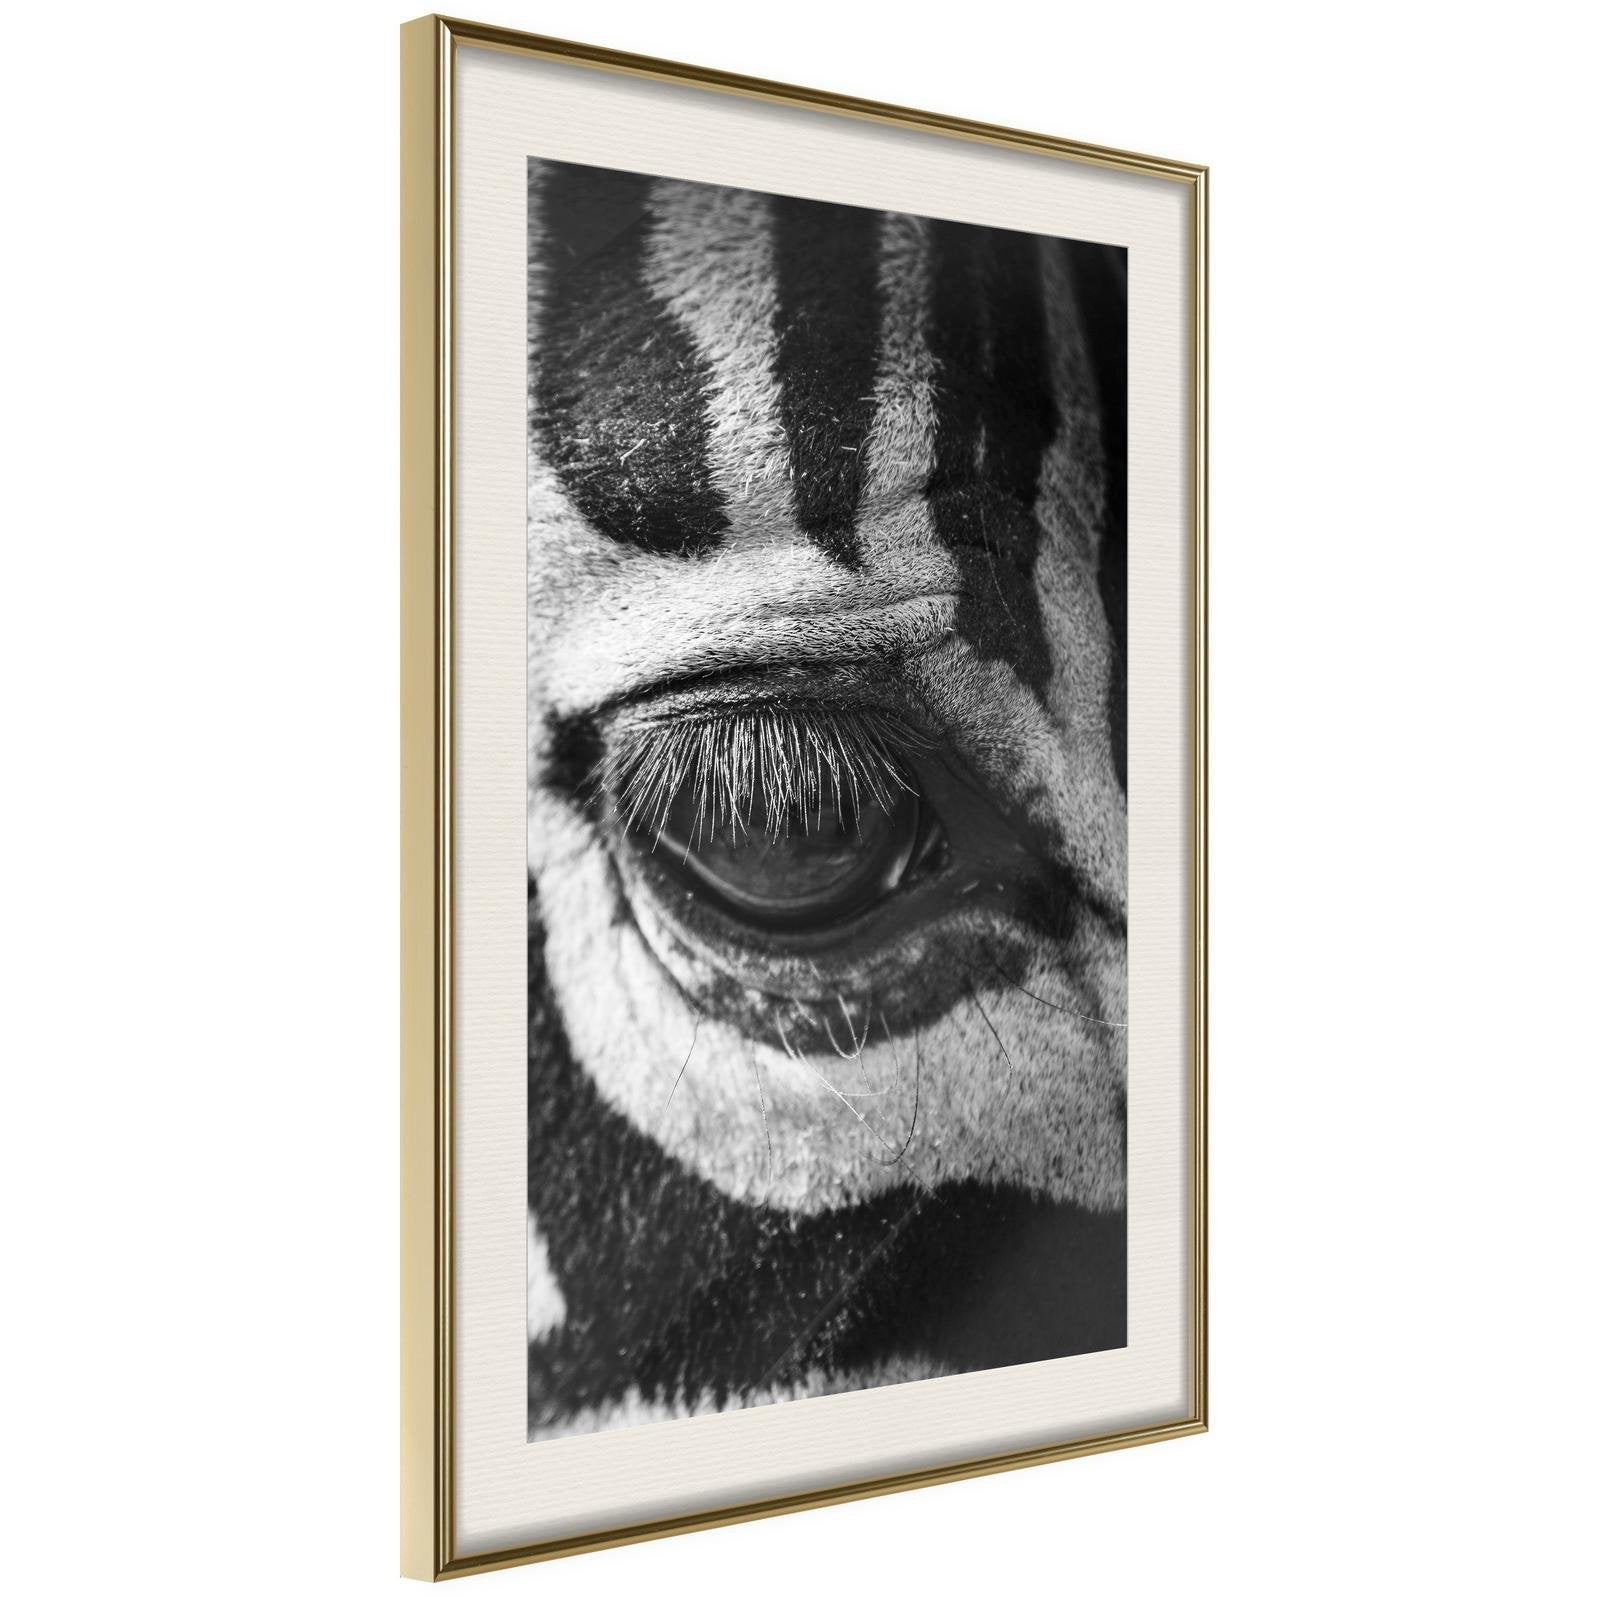 Inramad Poster / Tavla - Zebra Is Watching You-Poster Inramad-Artgeist-20x30-Guldram med passepartout-peaceofhome.se